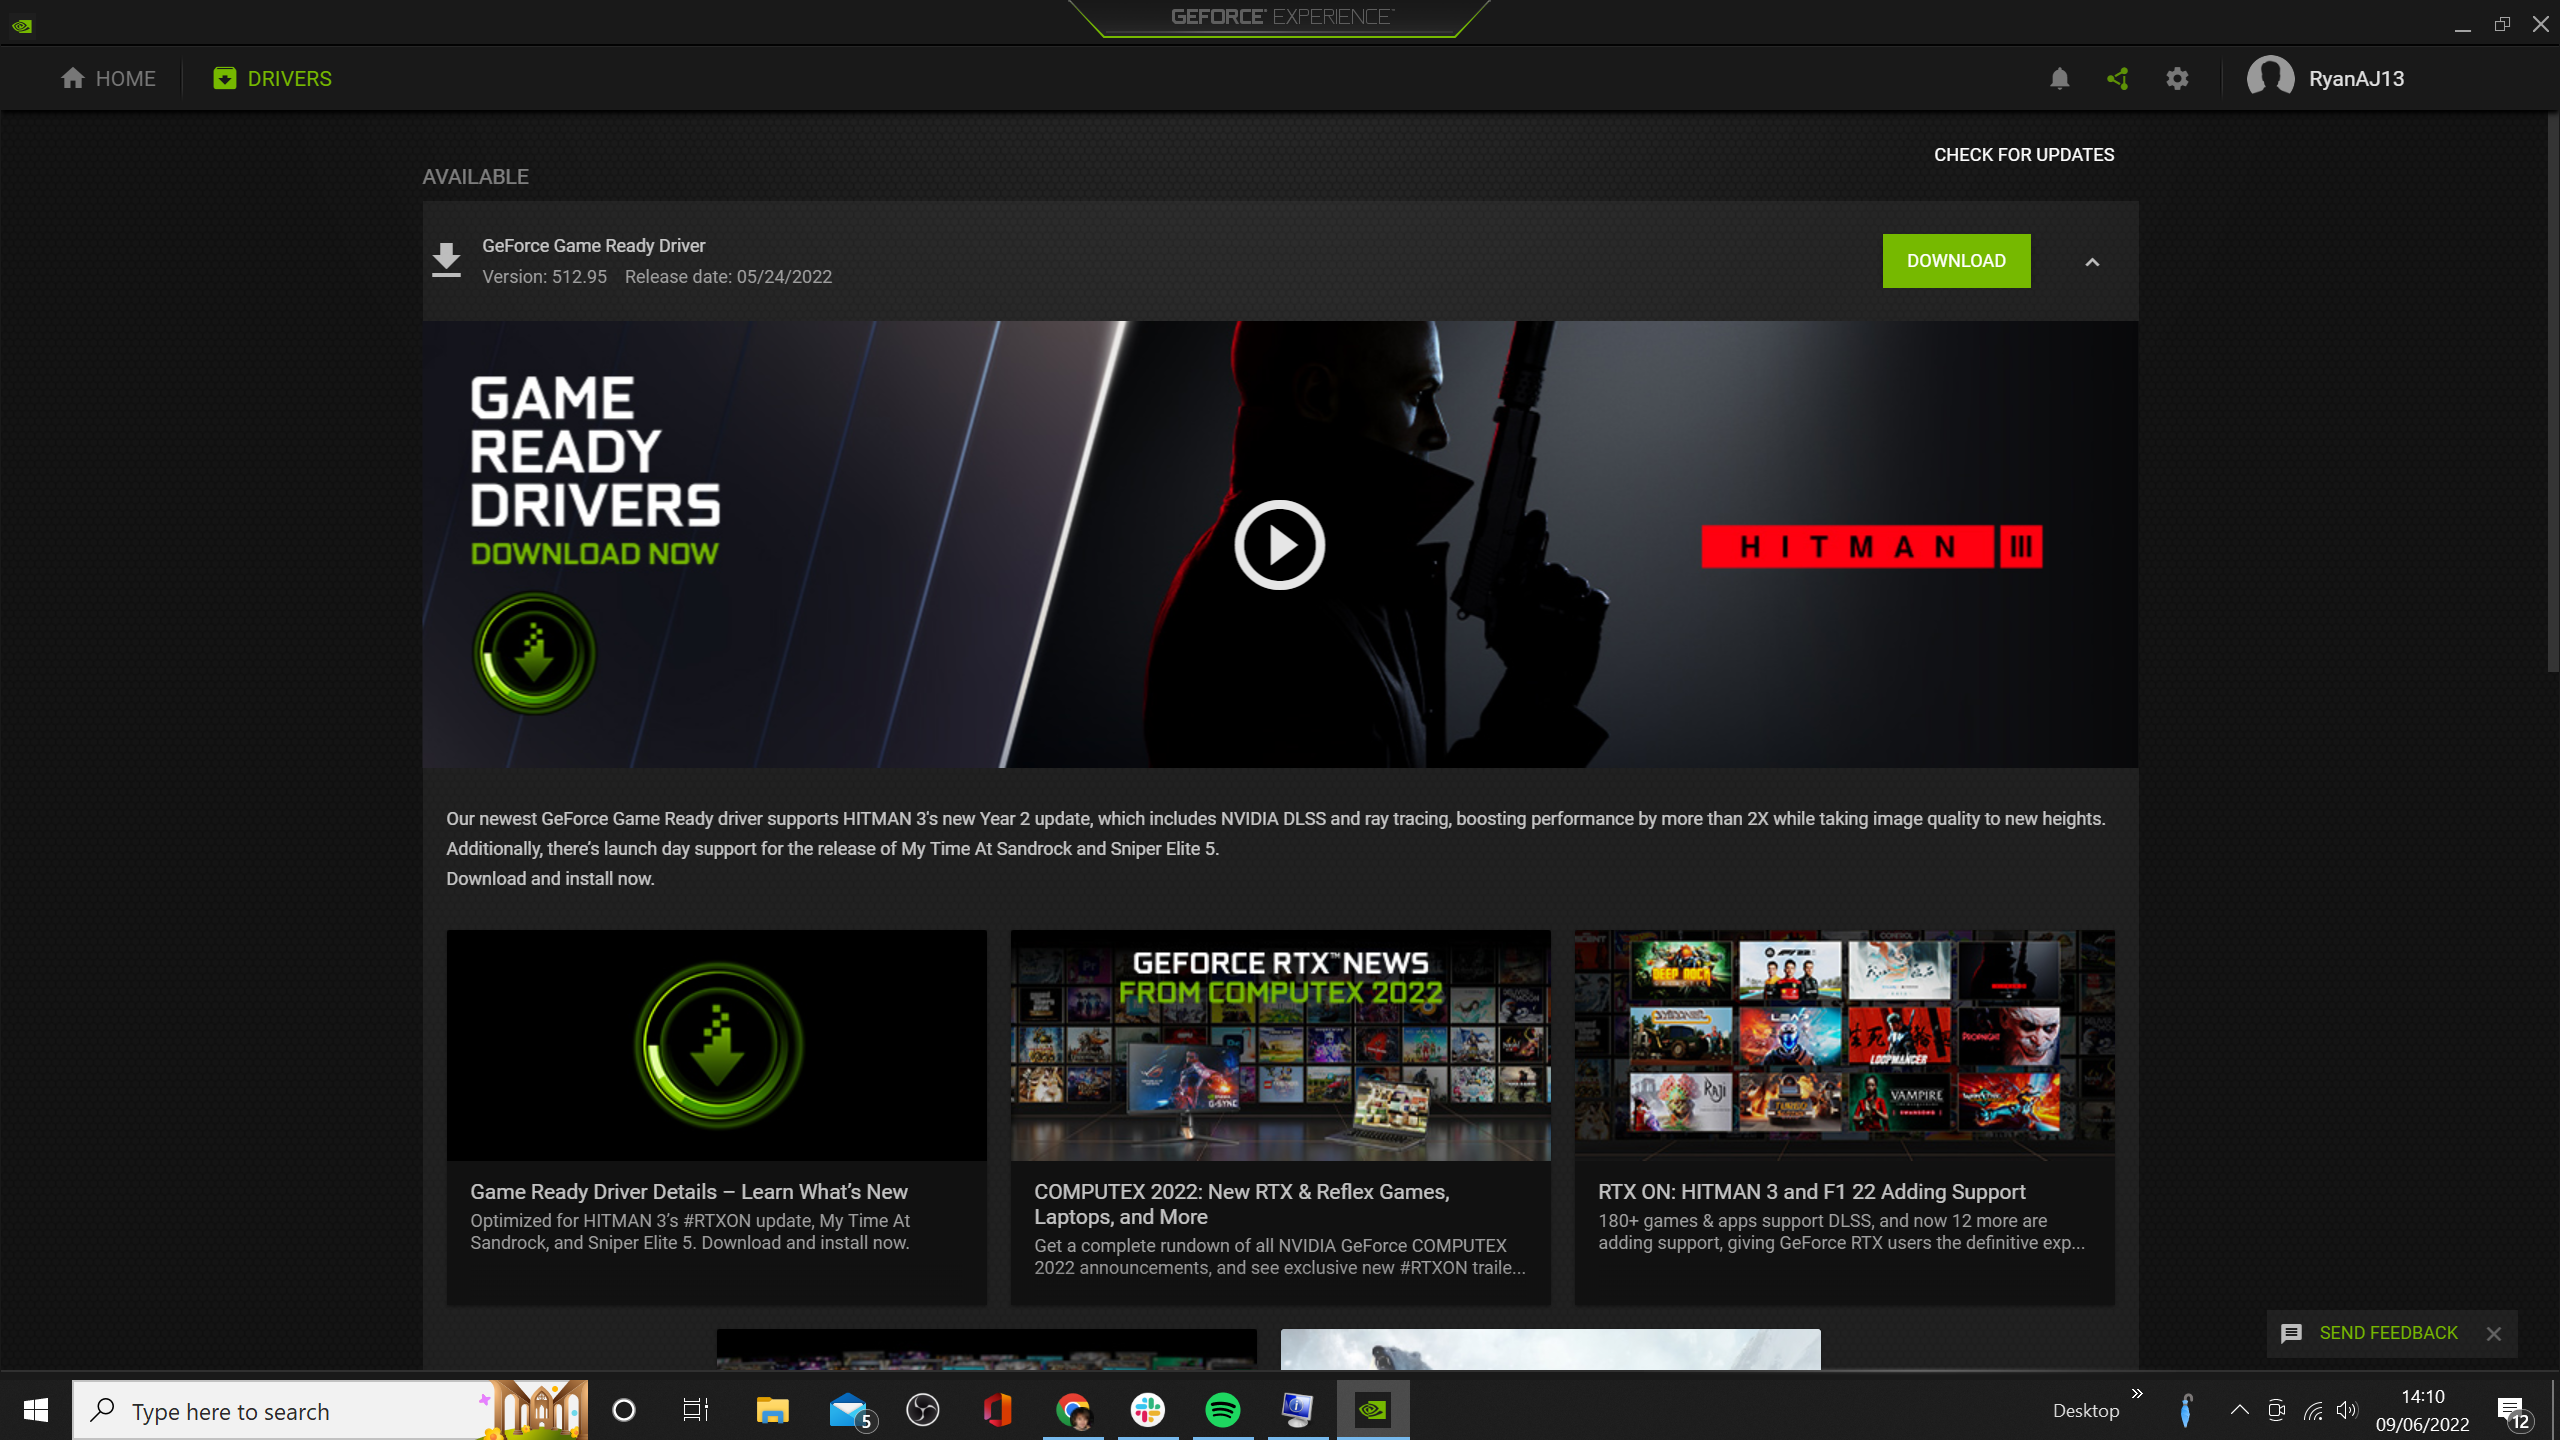 Check for any updates to your graphics card drivers
Download and install any available updates